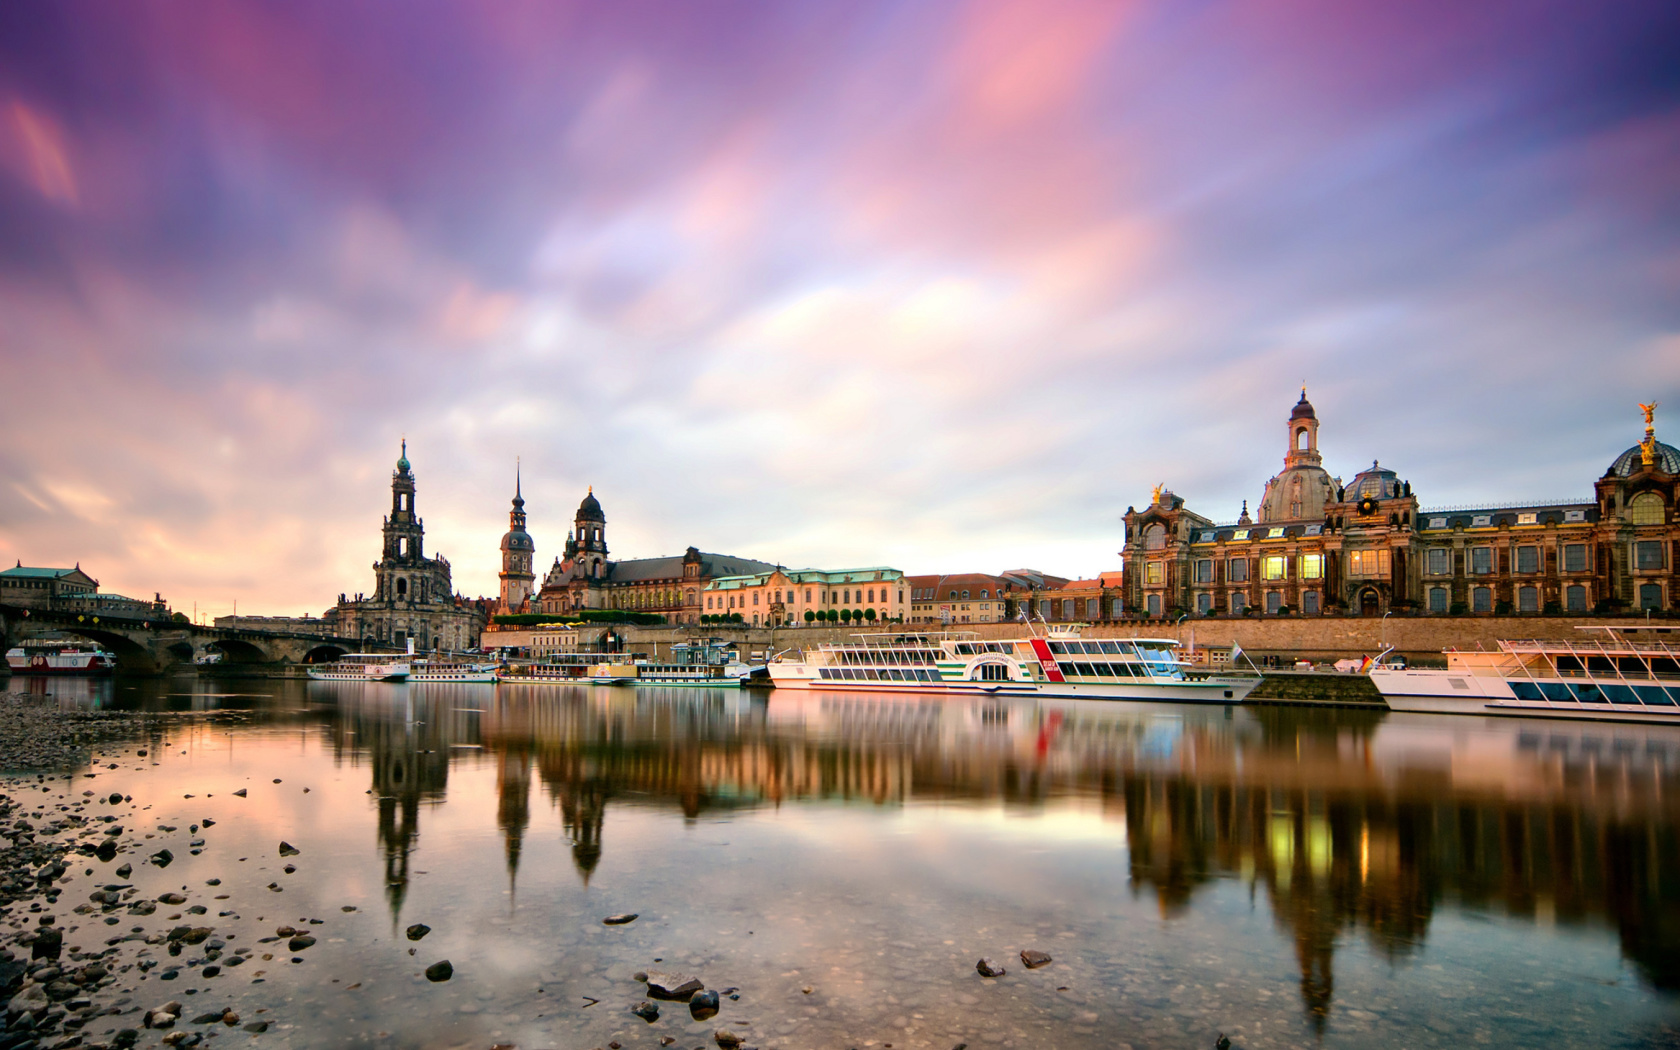 Dresden on Elbe River near Zwinger Palace wallpaper 1680x1050